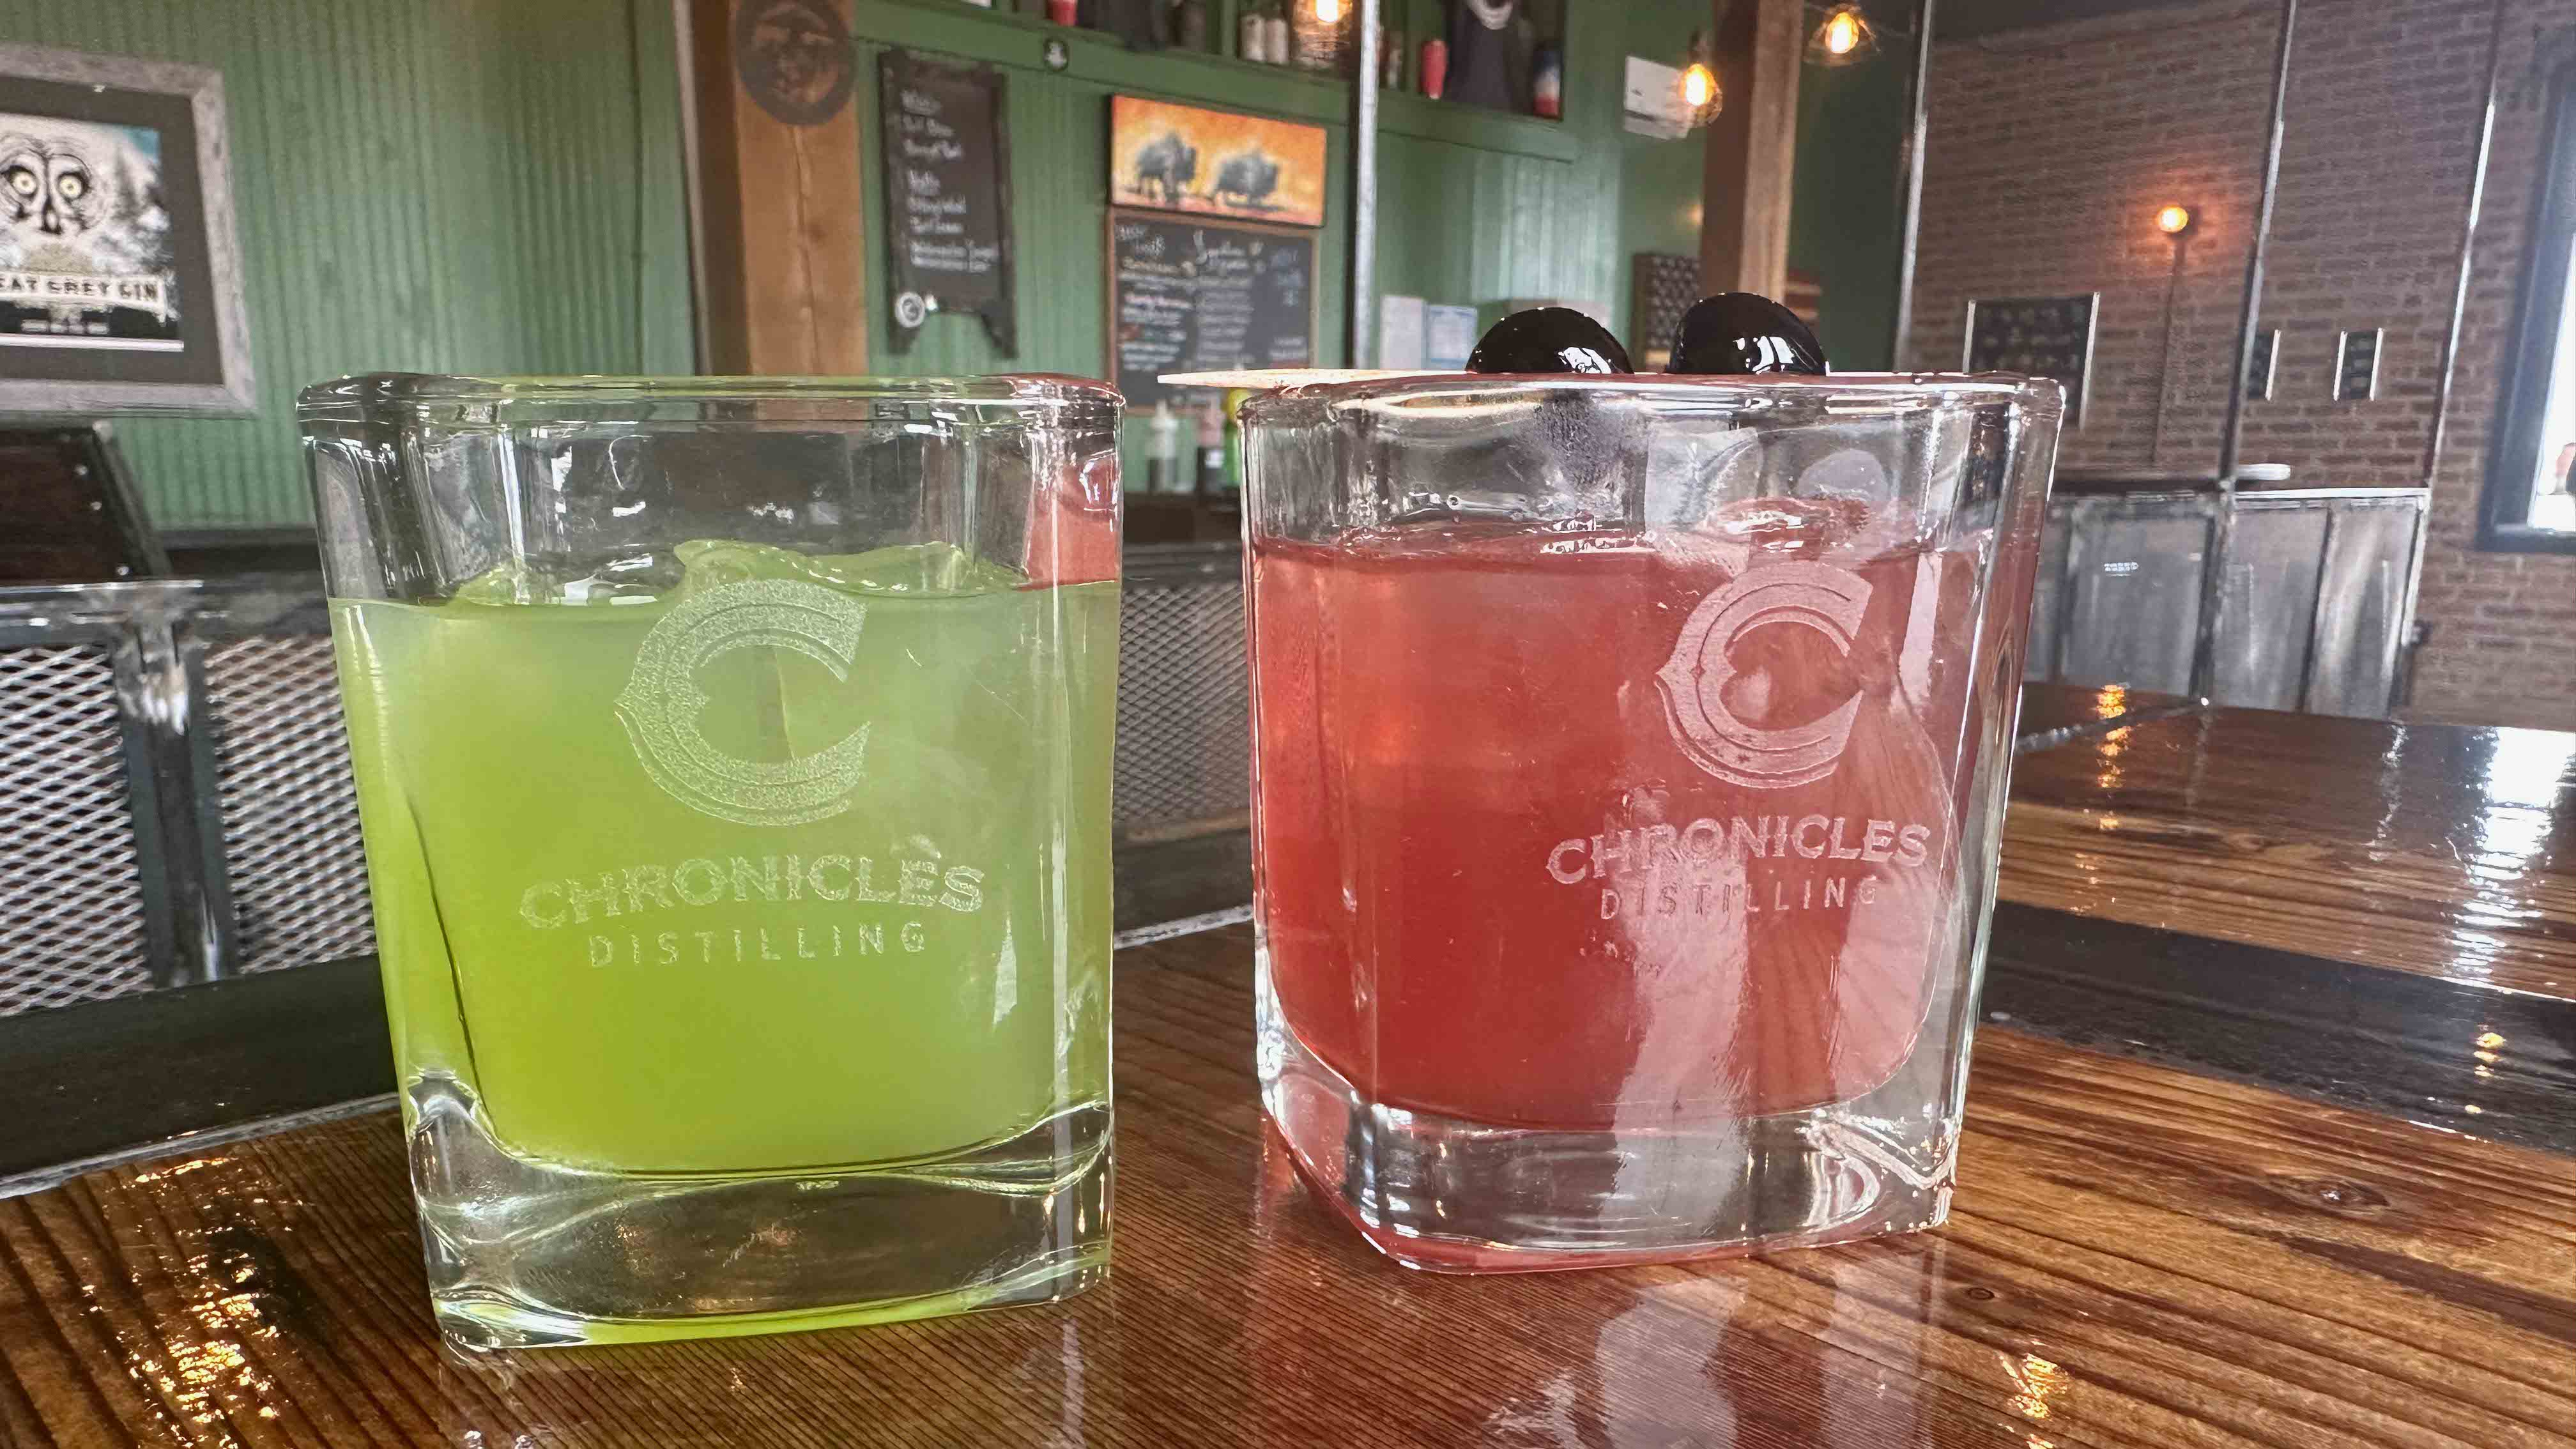 Chronicles Distilling specializes in corn-based spirits.Photo Credit: Amber Leberman